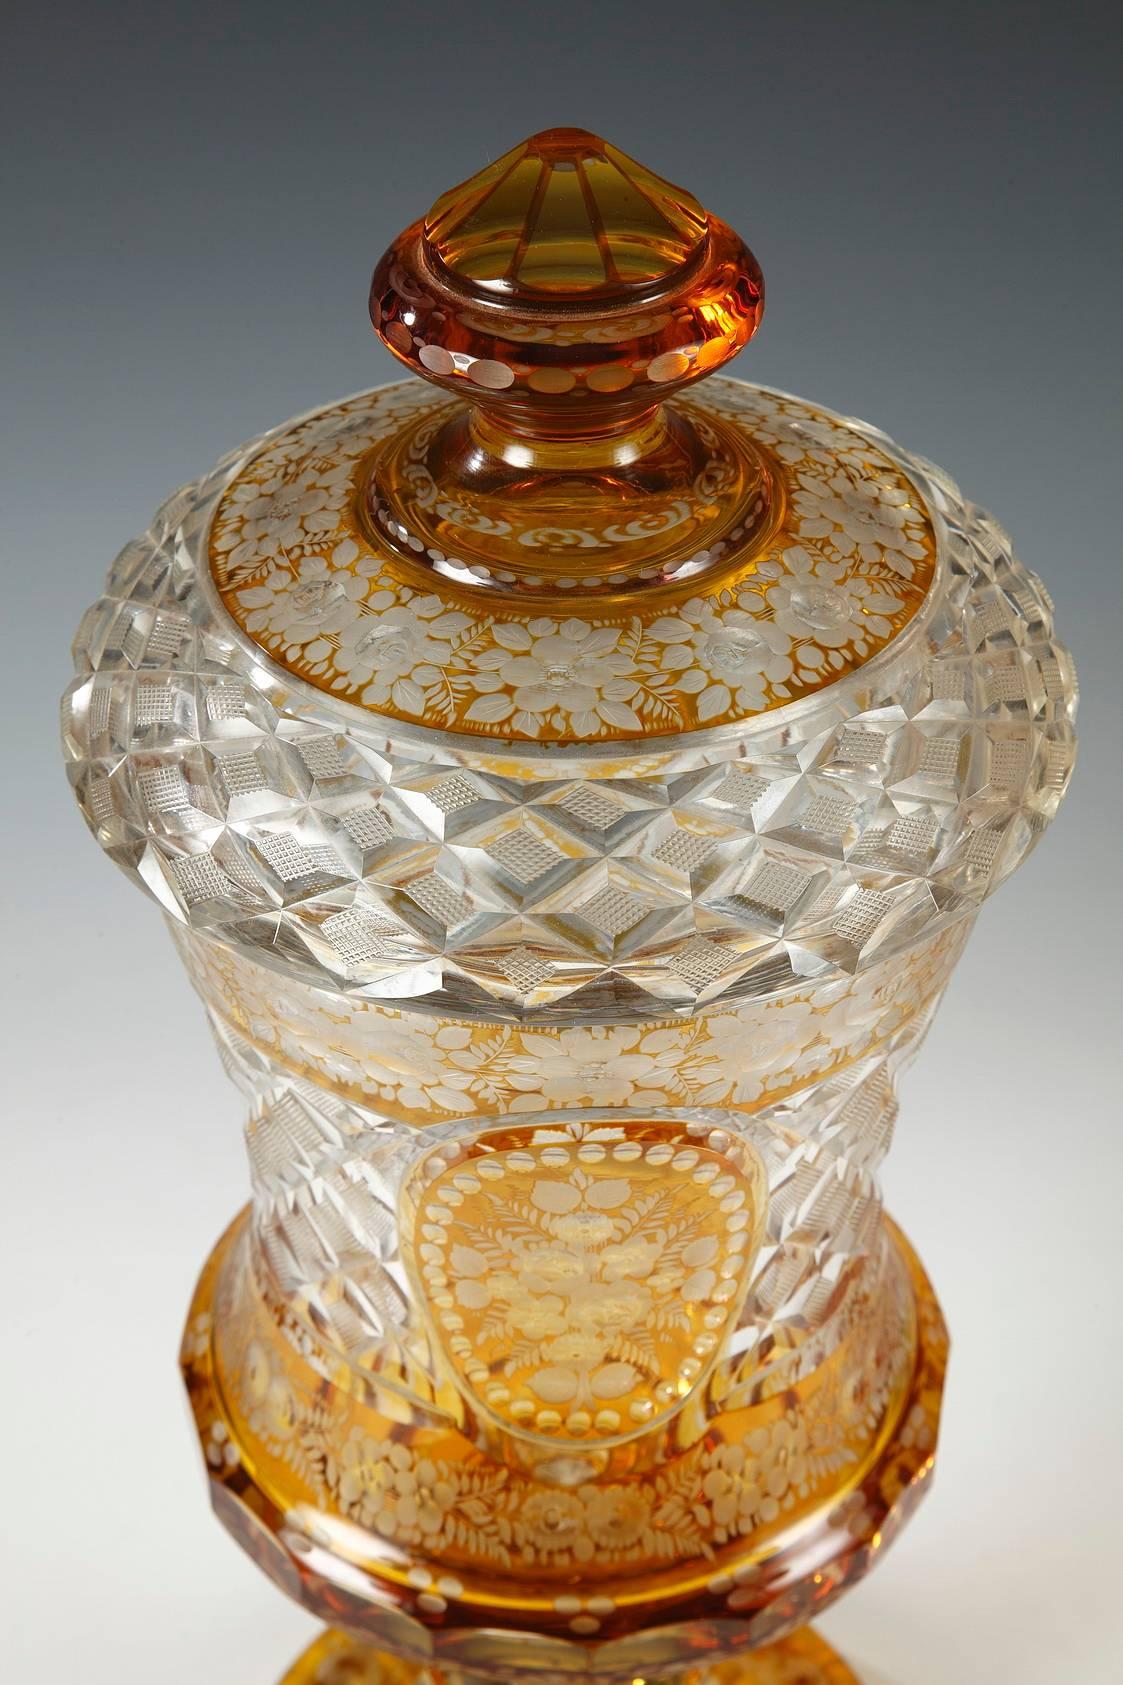 Ravishing pair of covered sweetmeat vases in Bohemian clear crystal suffused with amber, flared footed and slightly cup-shaped. The set is adorned with a rich wheel engraved decoration alternating between finely detailed floral patterns, pearl